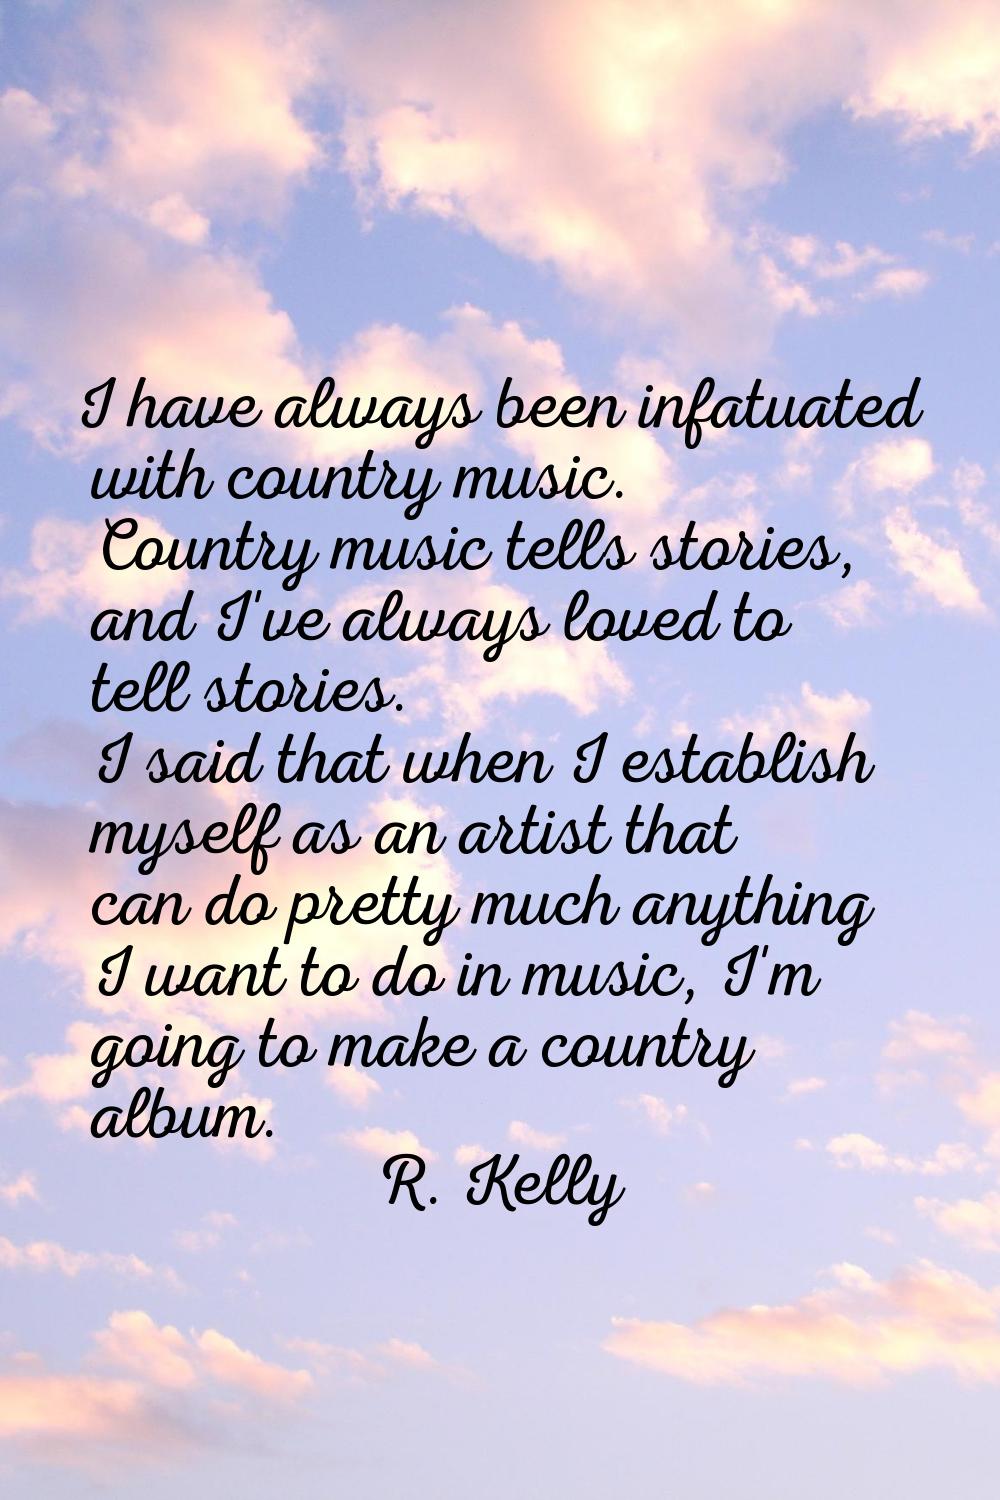 I have always been infatuated with country music. Country music tells stories, and I've always love